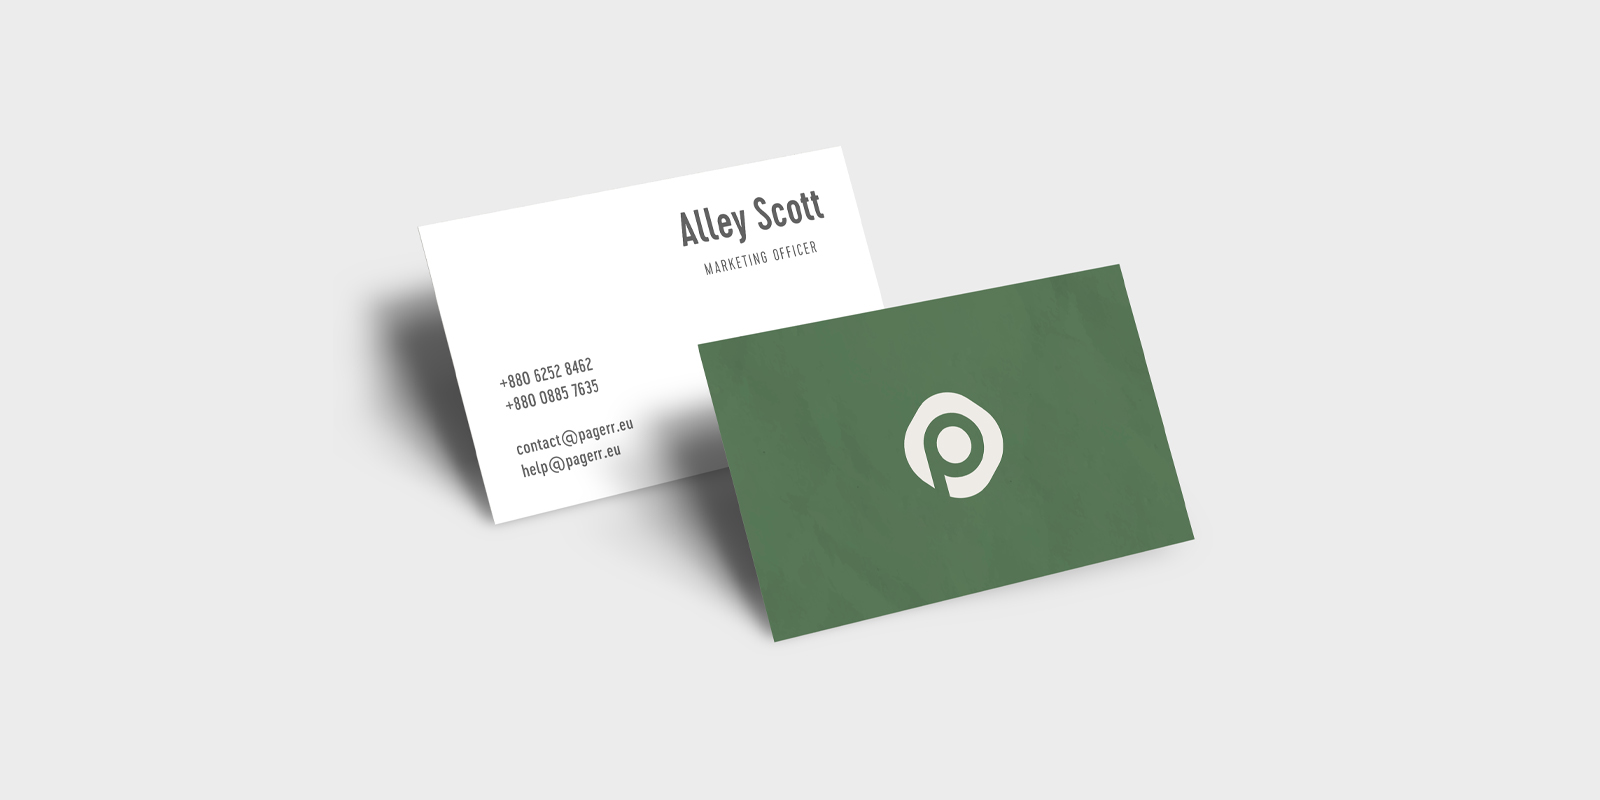 Simple business cards in Newcastle - Print with Pagerr